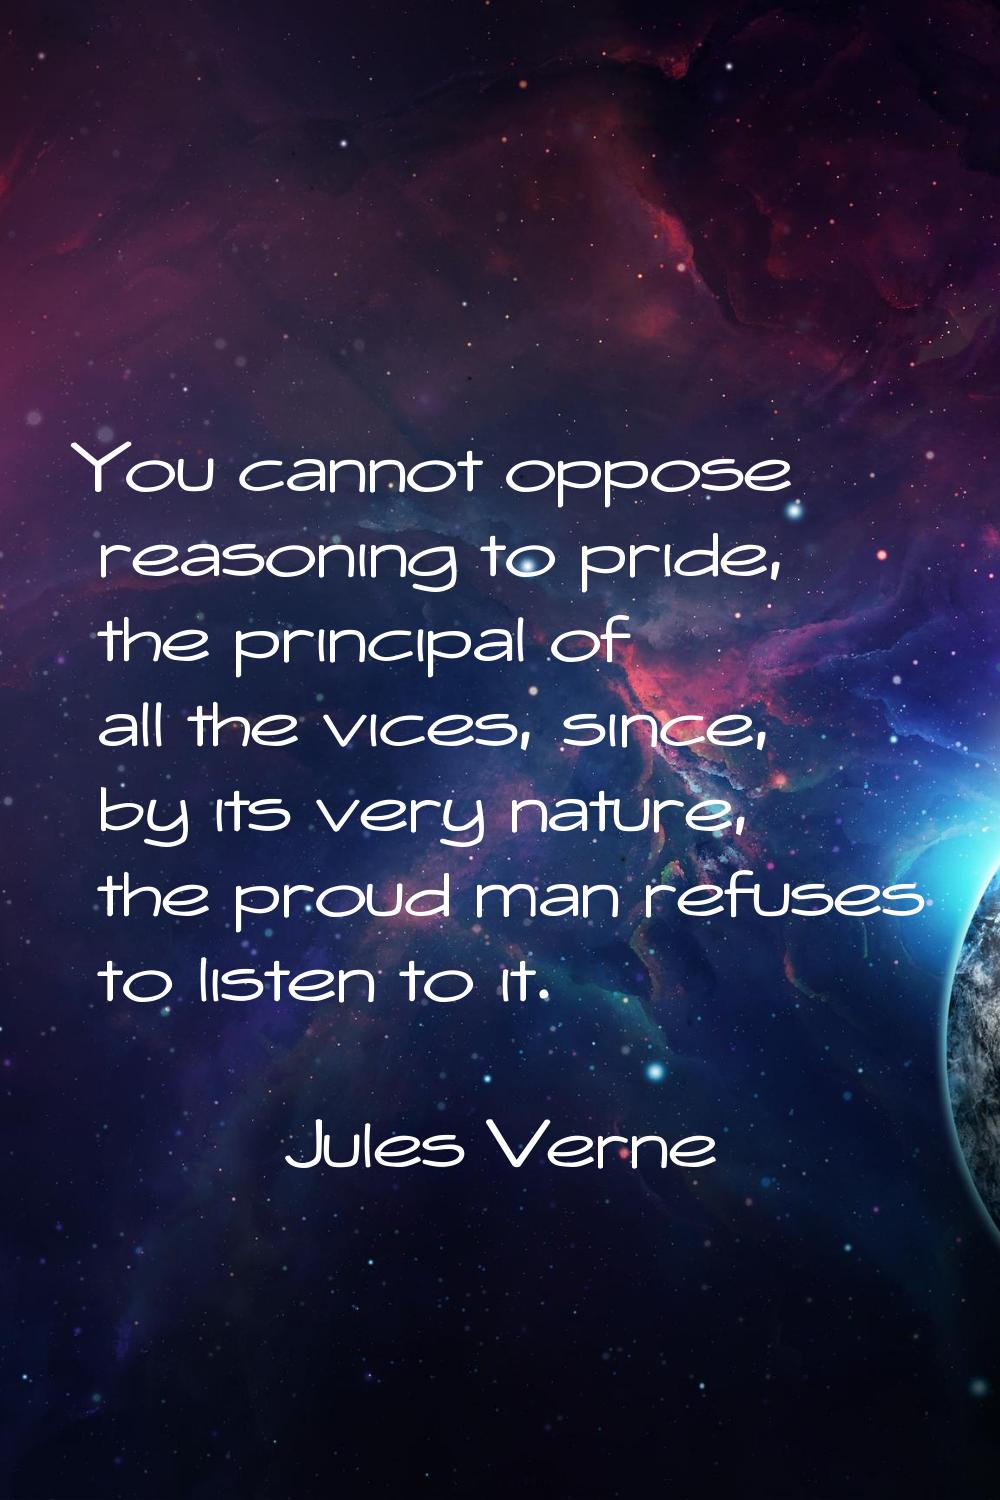 You cannot oppose reasoning to pride, the principal of all the vices, since, by its very nature, th